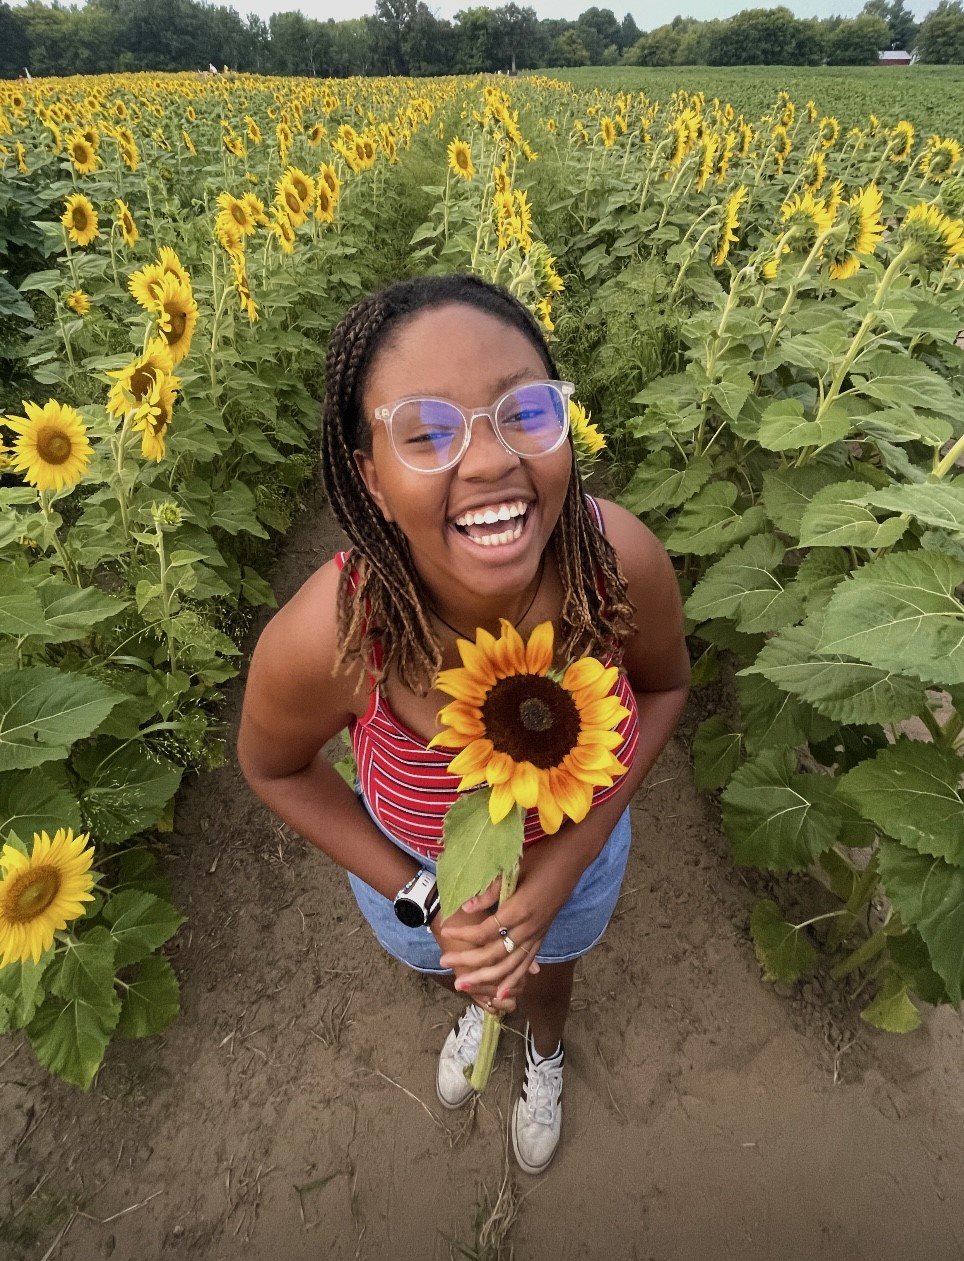 Faith stands smiling wide in an open field of sunflowers holding a single bright yellow and orange rimmed sunflower.